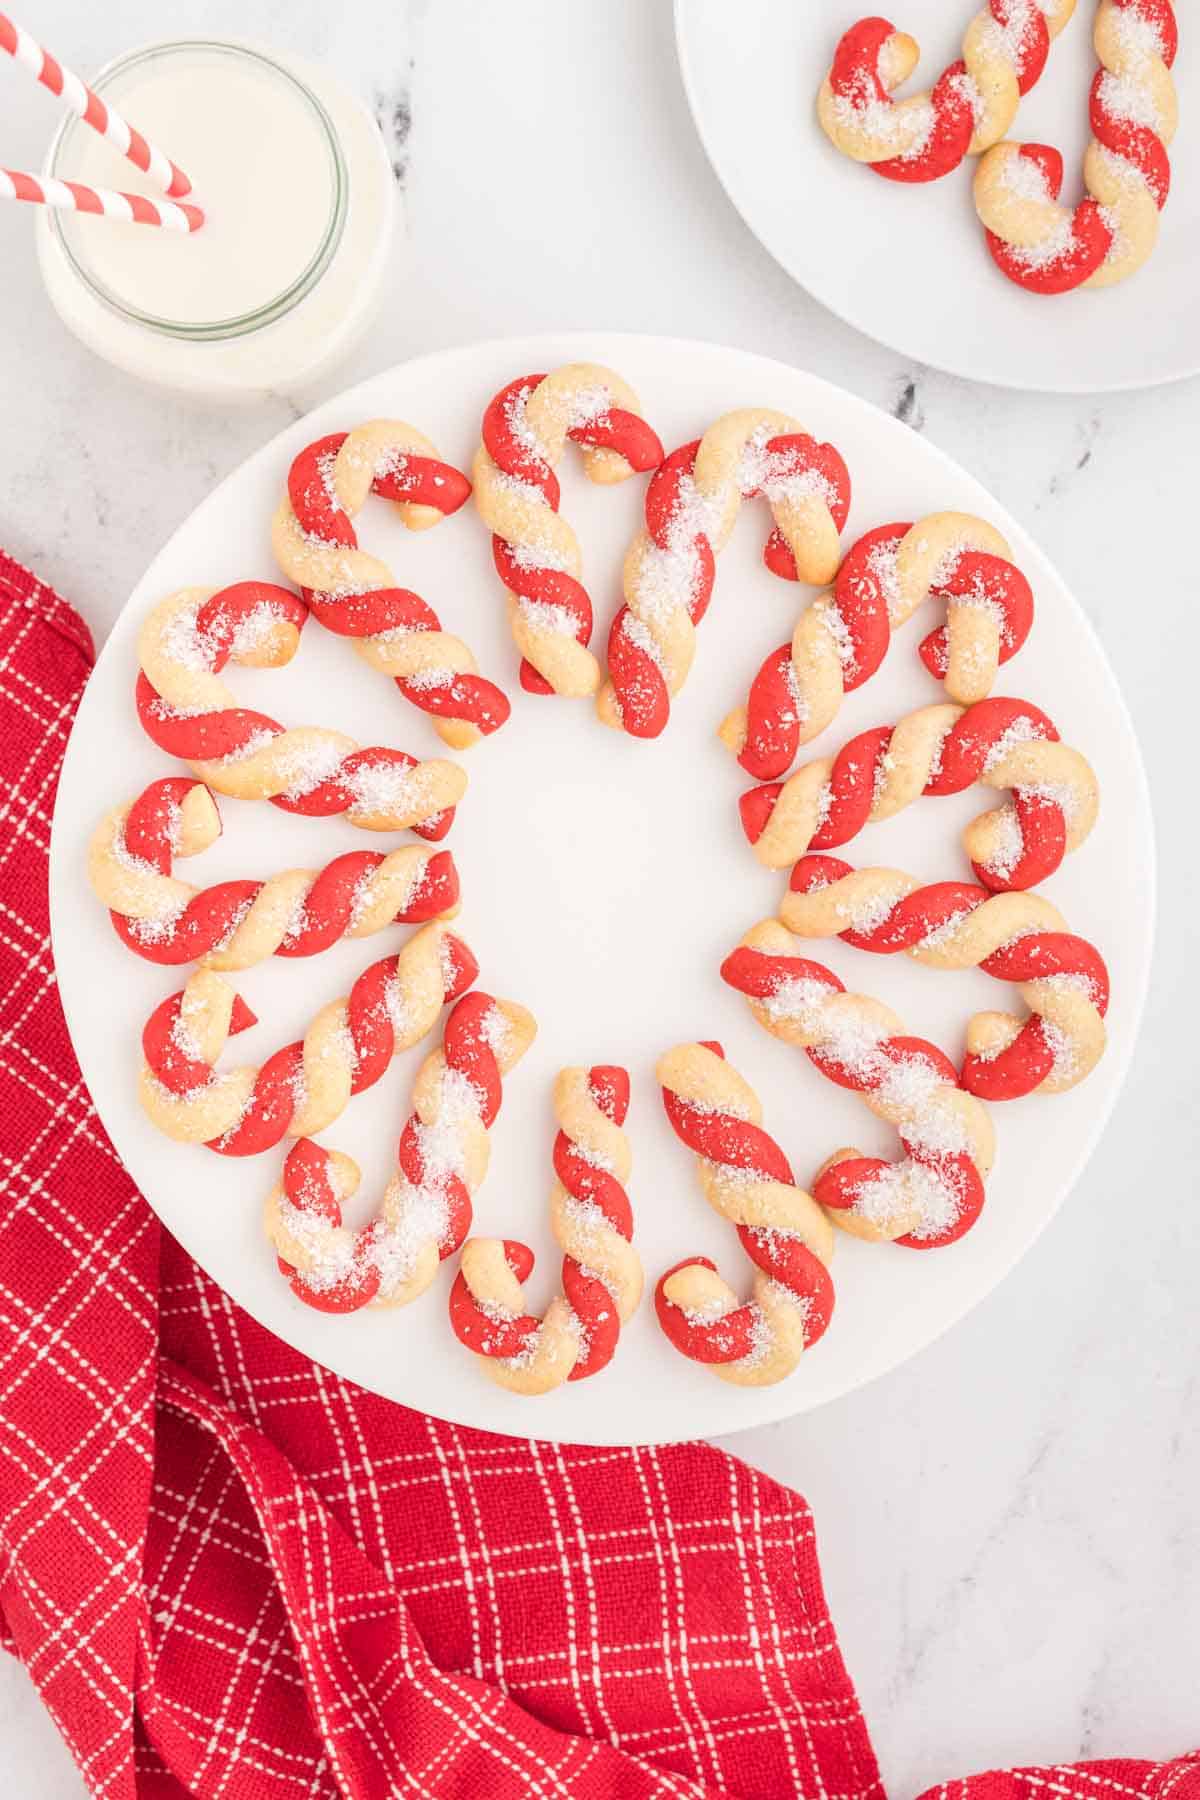 Candy cane cookies on a plate next to a glass of milk.